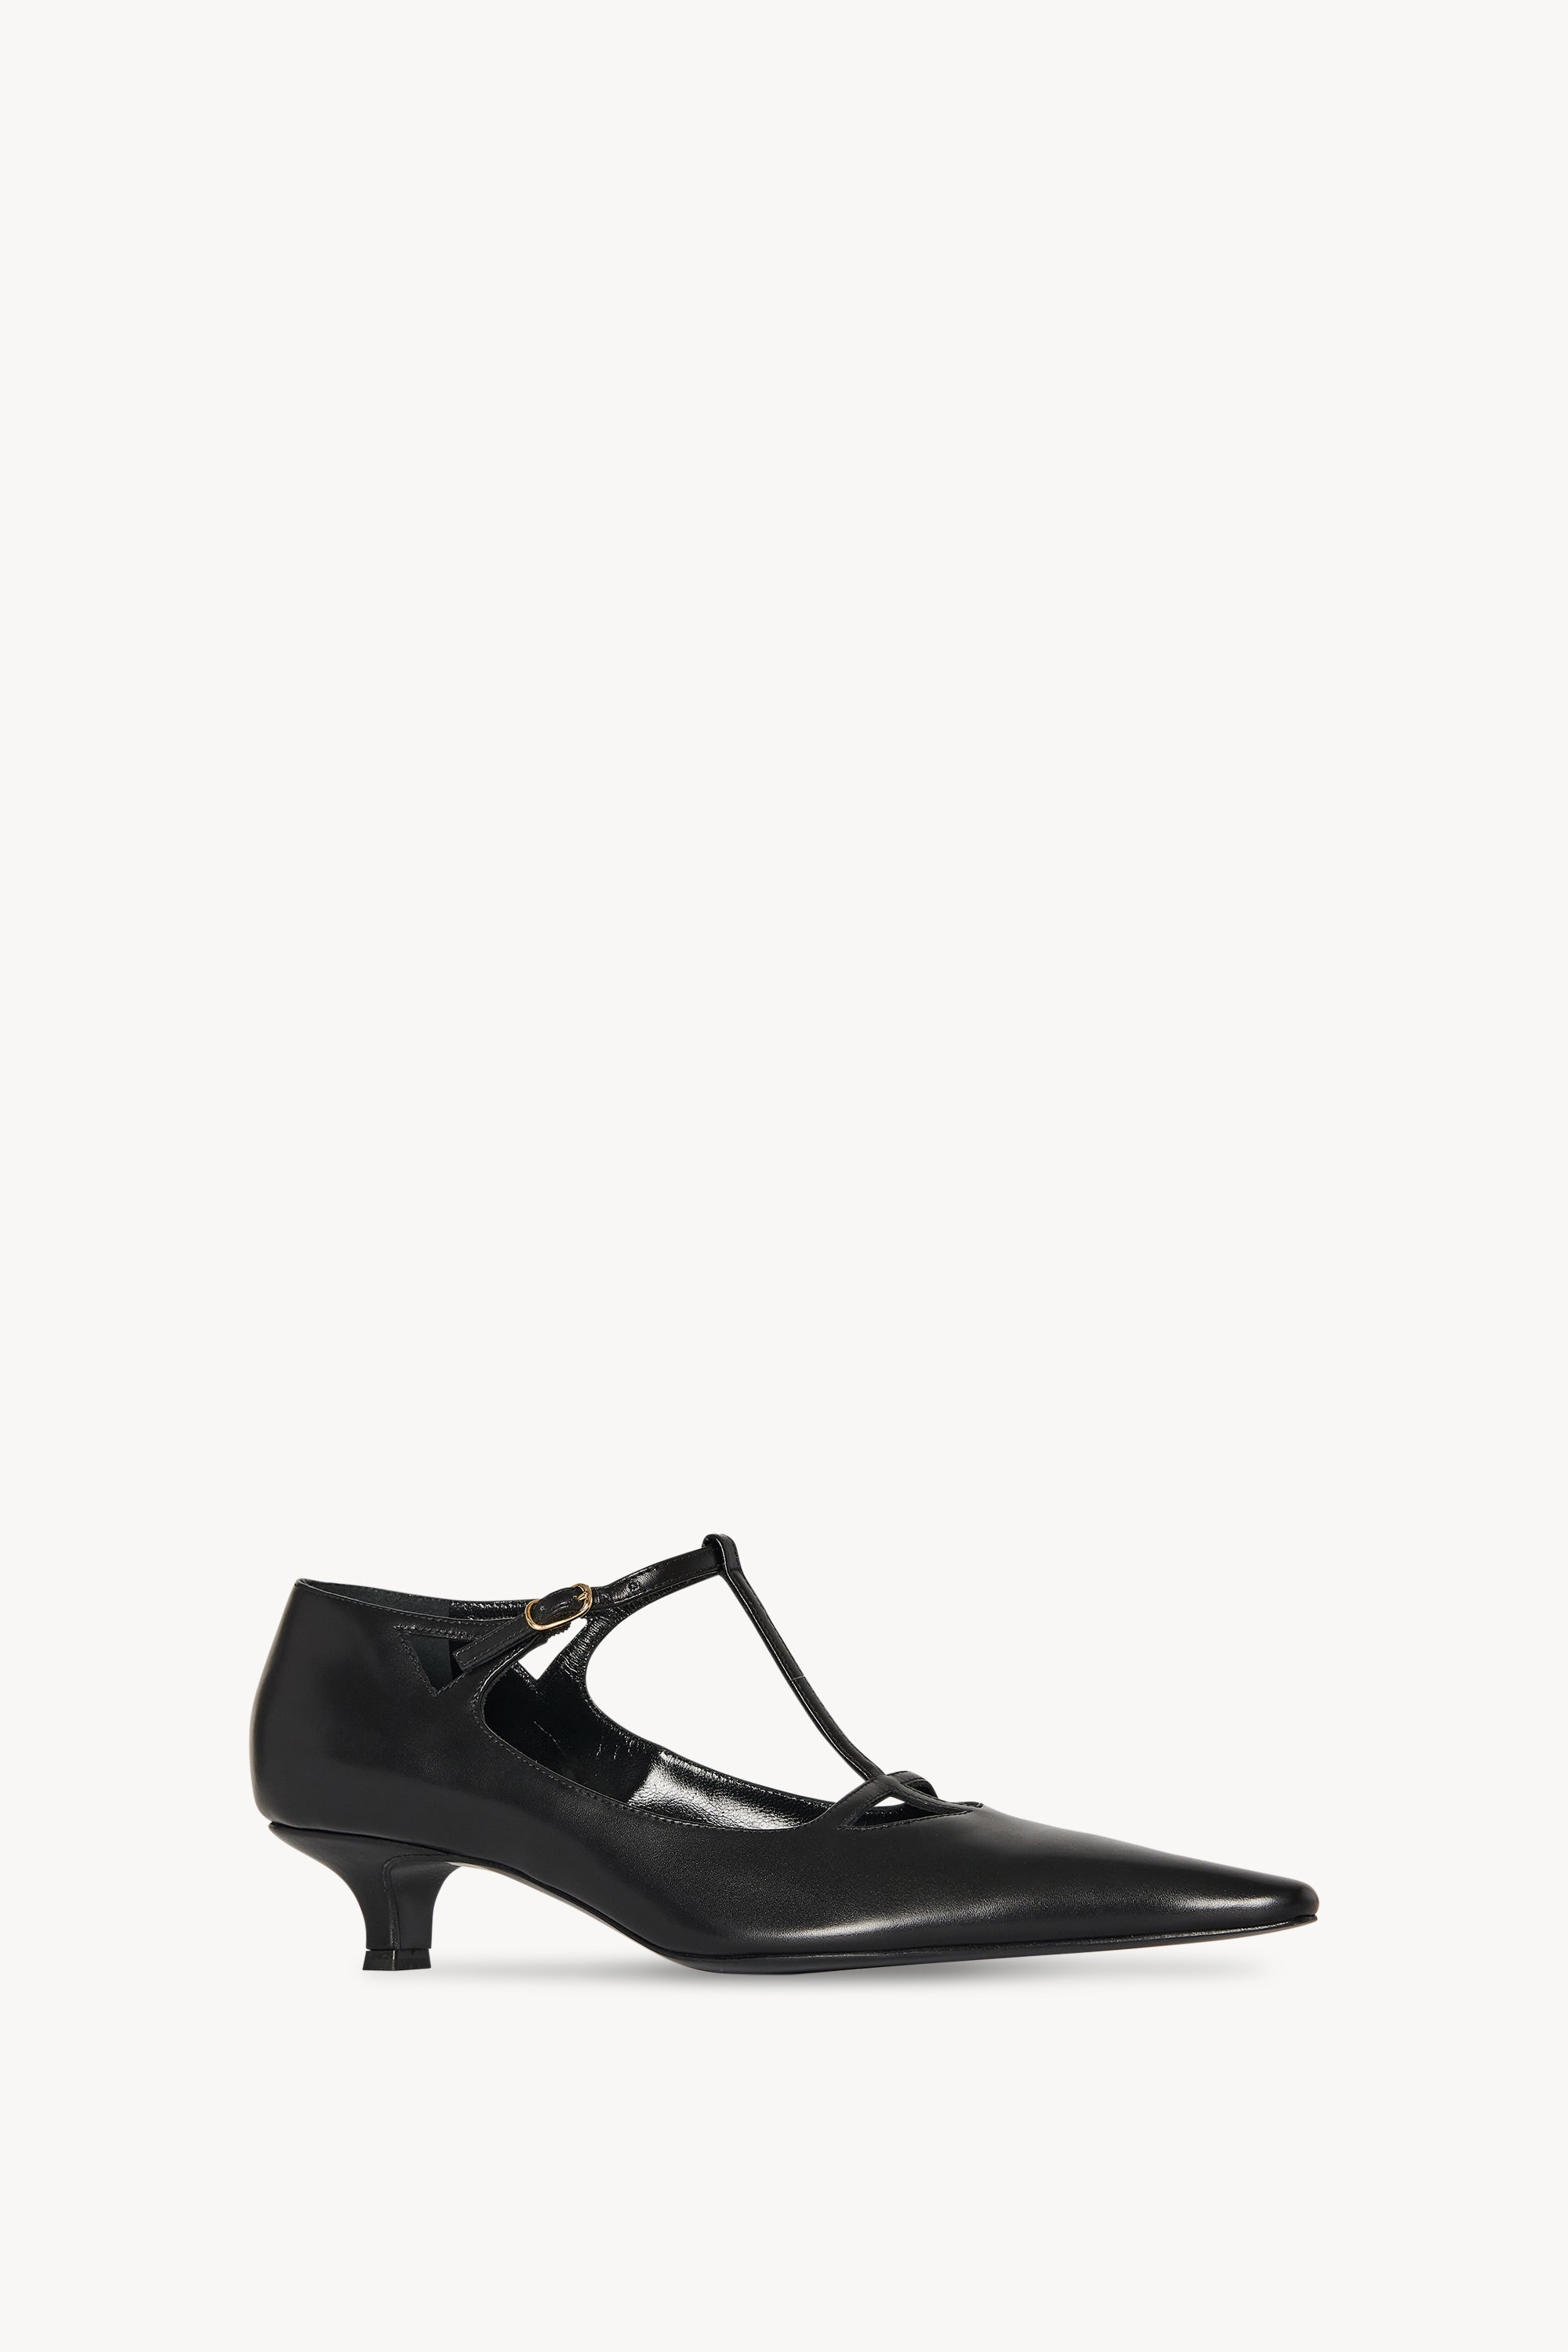 Cyd Shoe Black in Leather – The Row